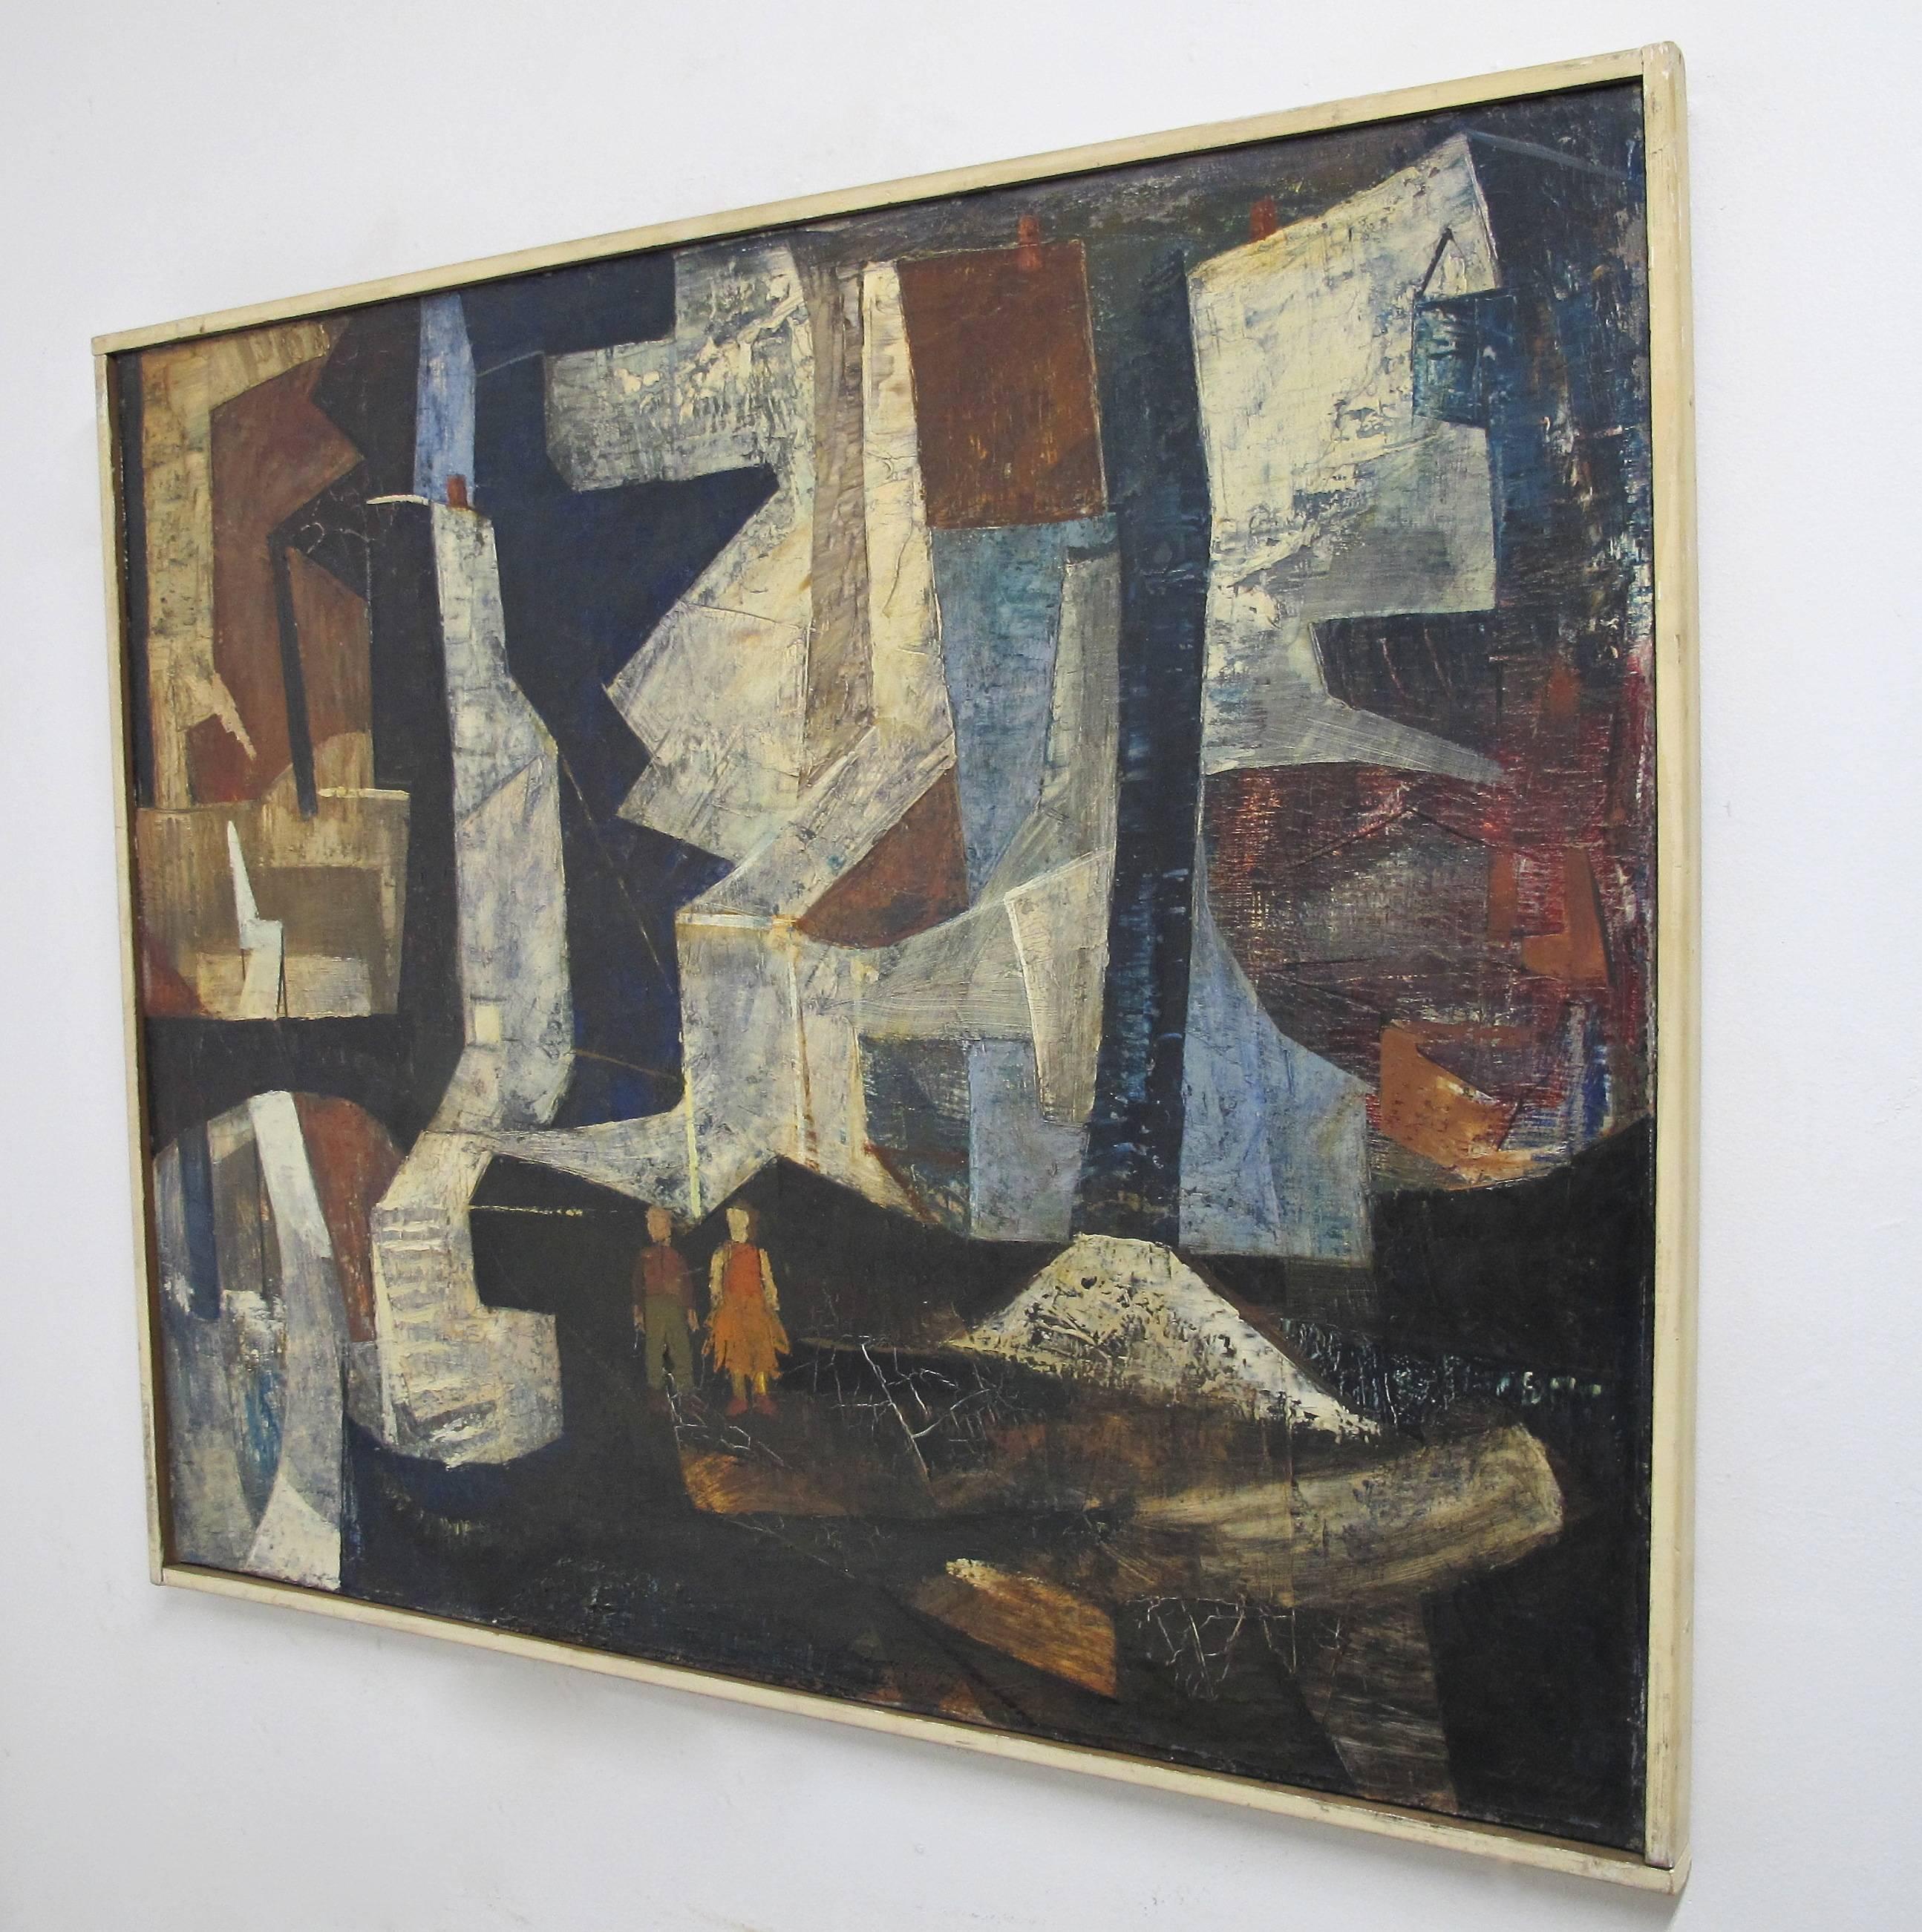 Abstract painting, oil on canvas in original painted wood frame by Bay Area San Francisco artist Lee Fraley, signed on back of canvas. Retains original gallery label on back. Mid-Century (1960s), American.

In overall very good vintage condition,